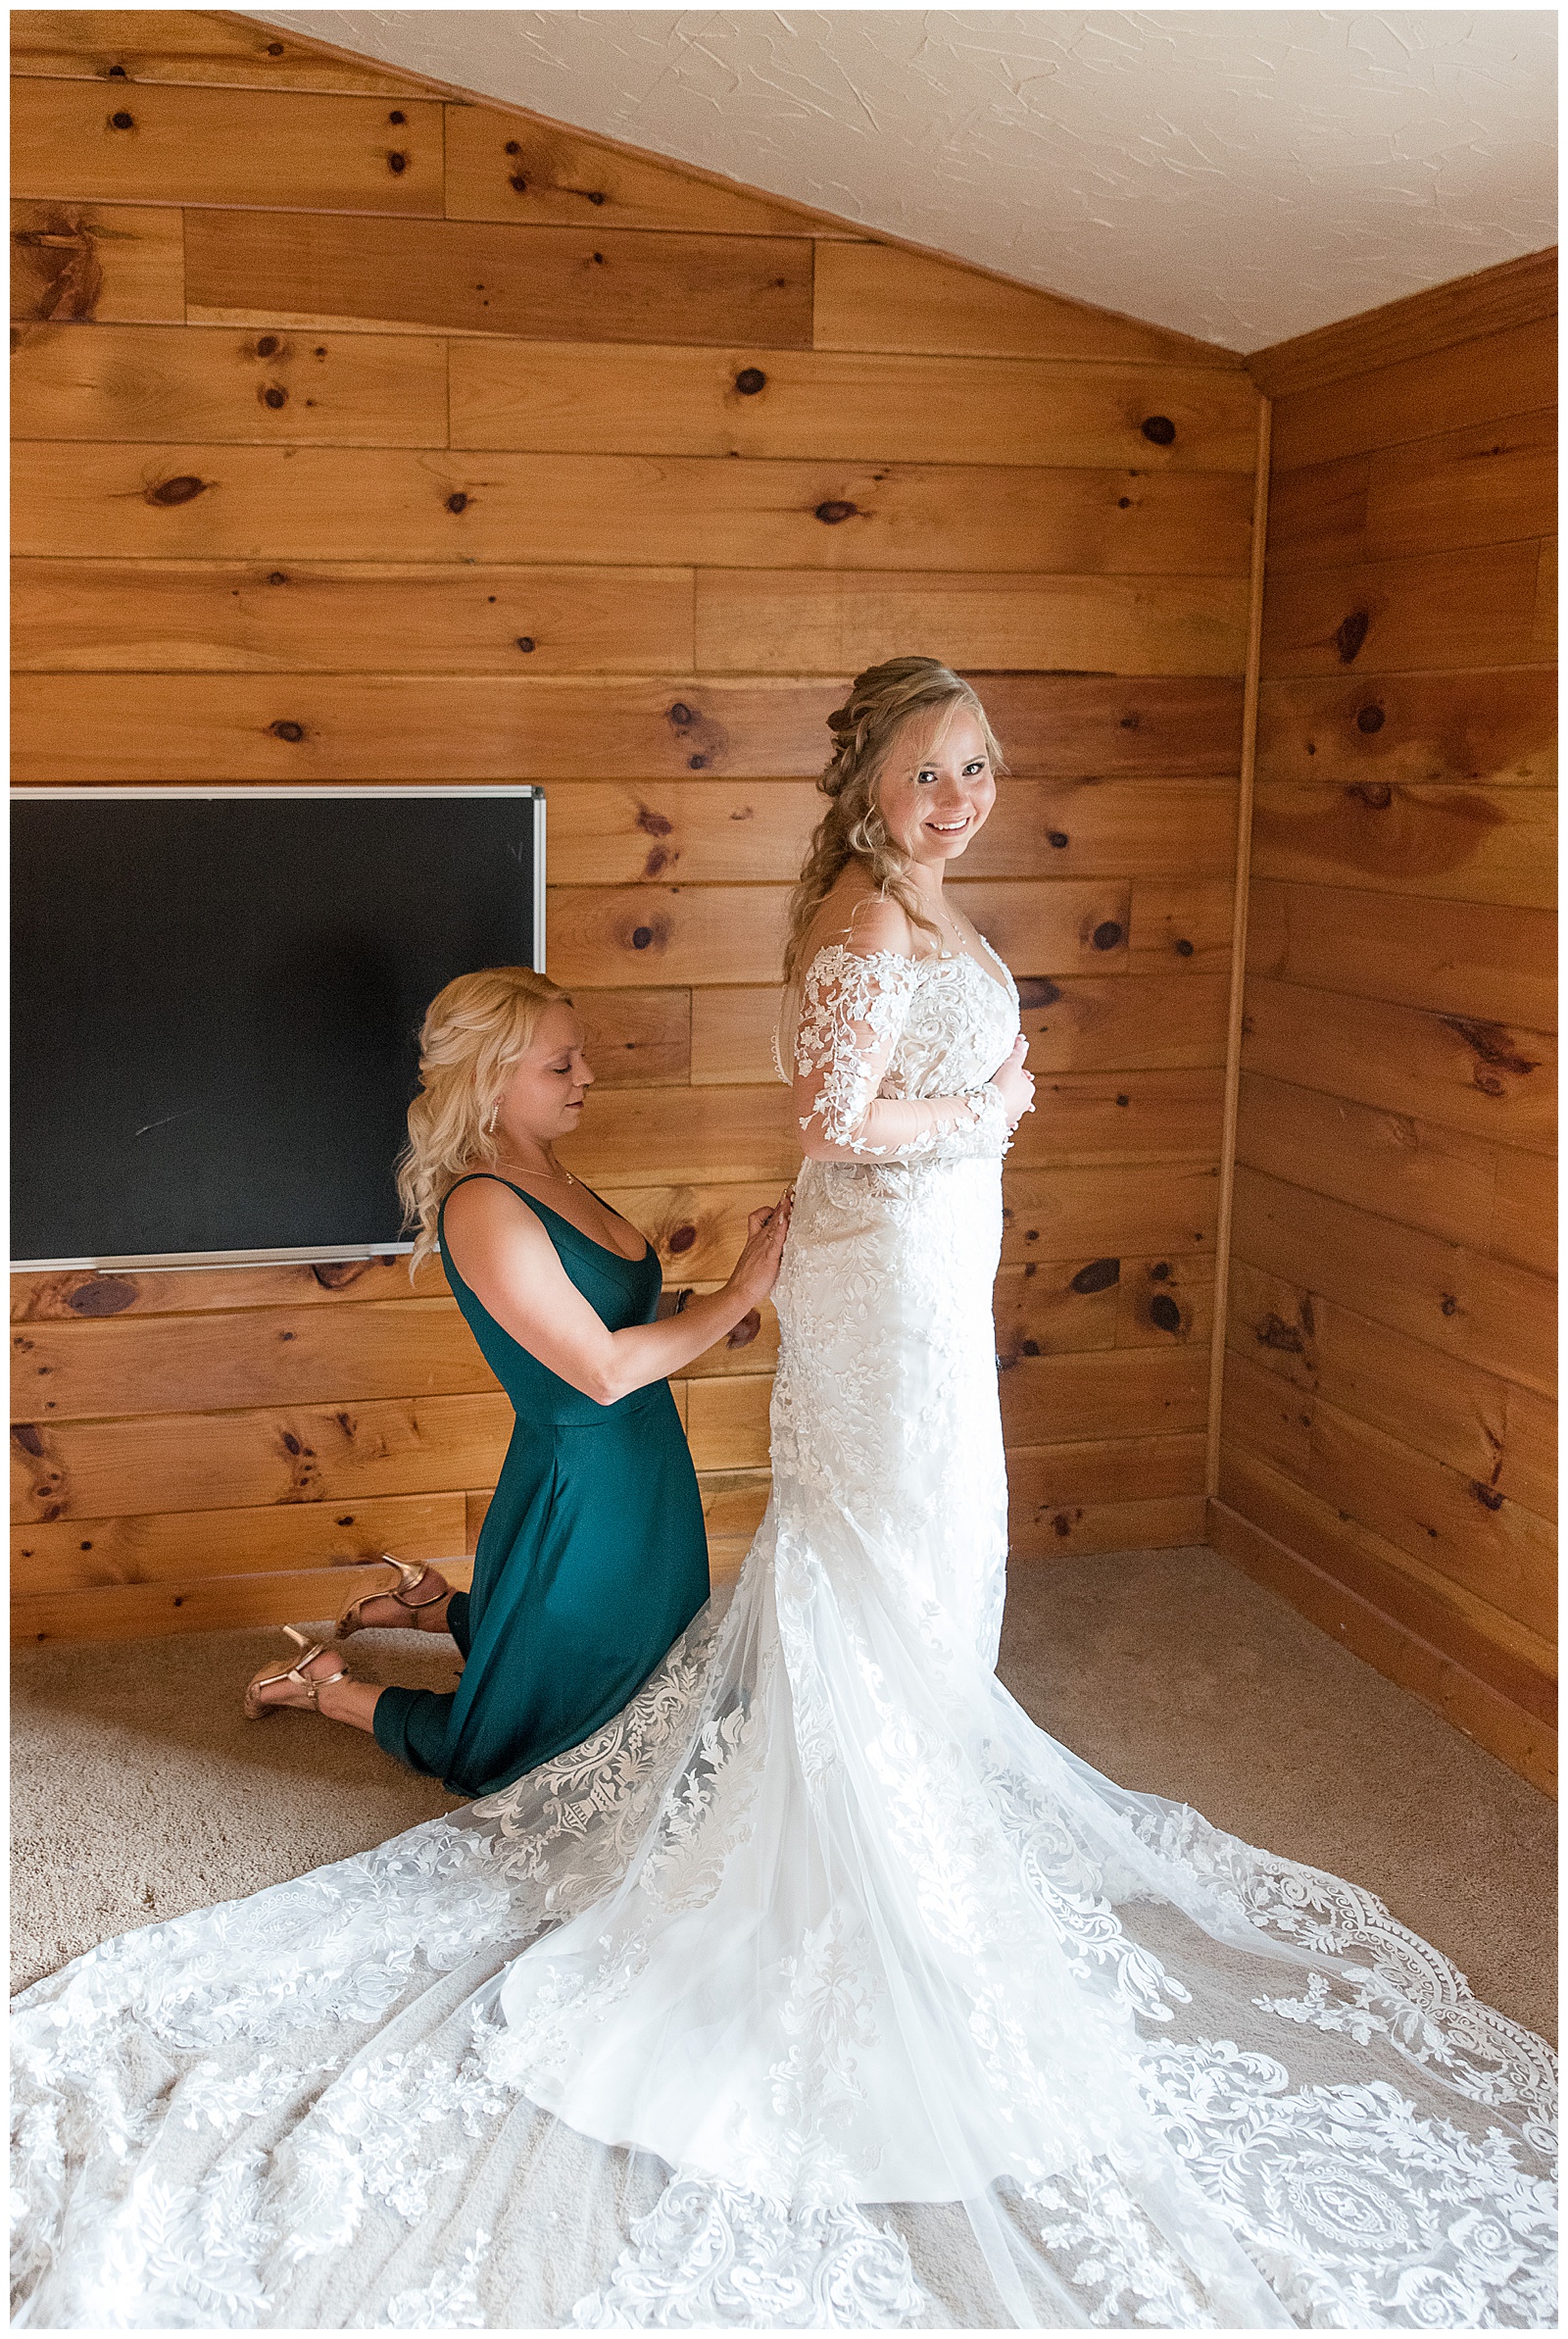 matron of honor in dark teal gown buttoning up the bride's back of her white gown in bridal suite in dover pennsylvania